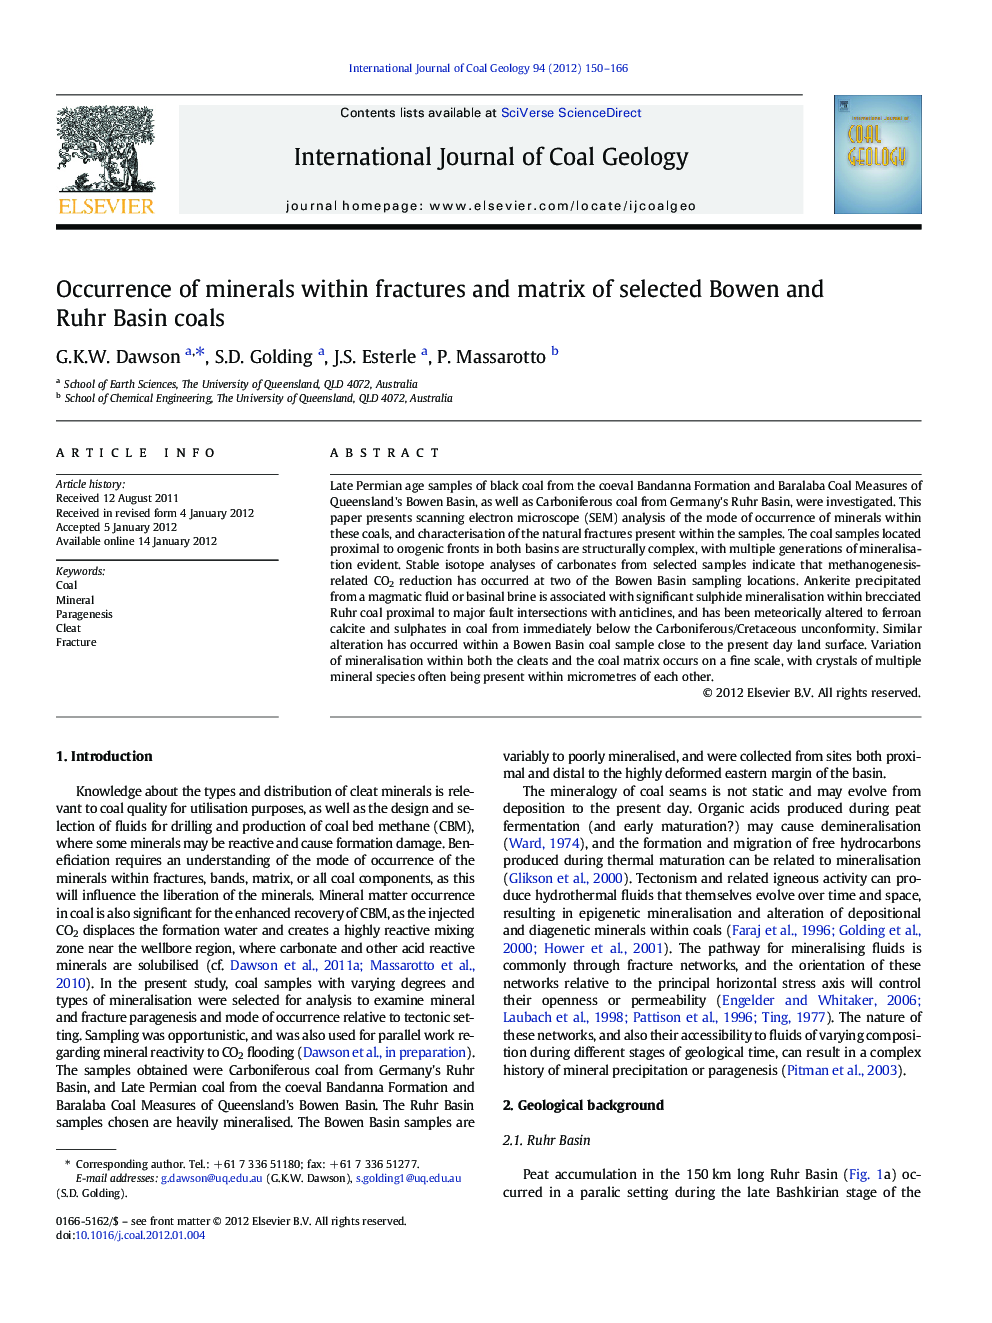 Occurrence of minerals within fractures and matrix of selected Bowen and Ruhr Basin coals